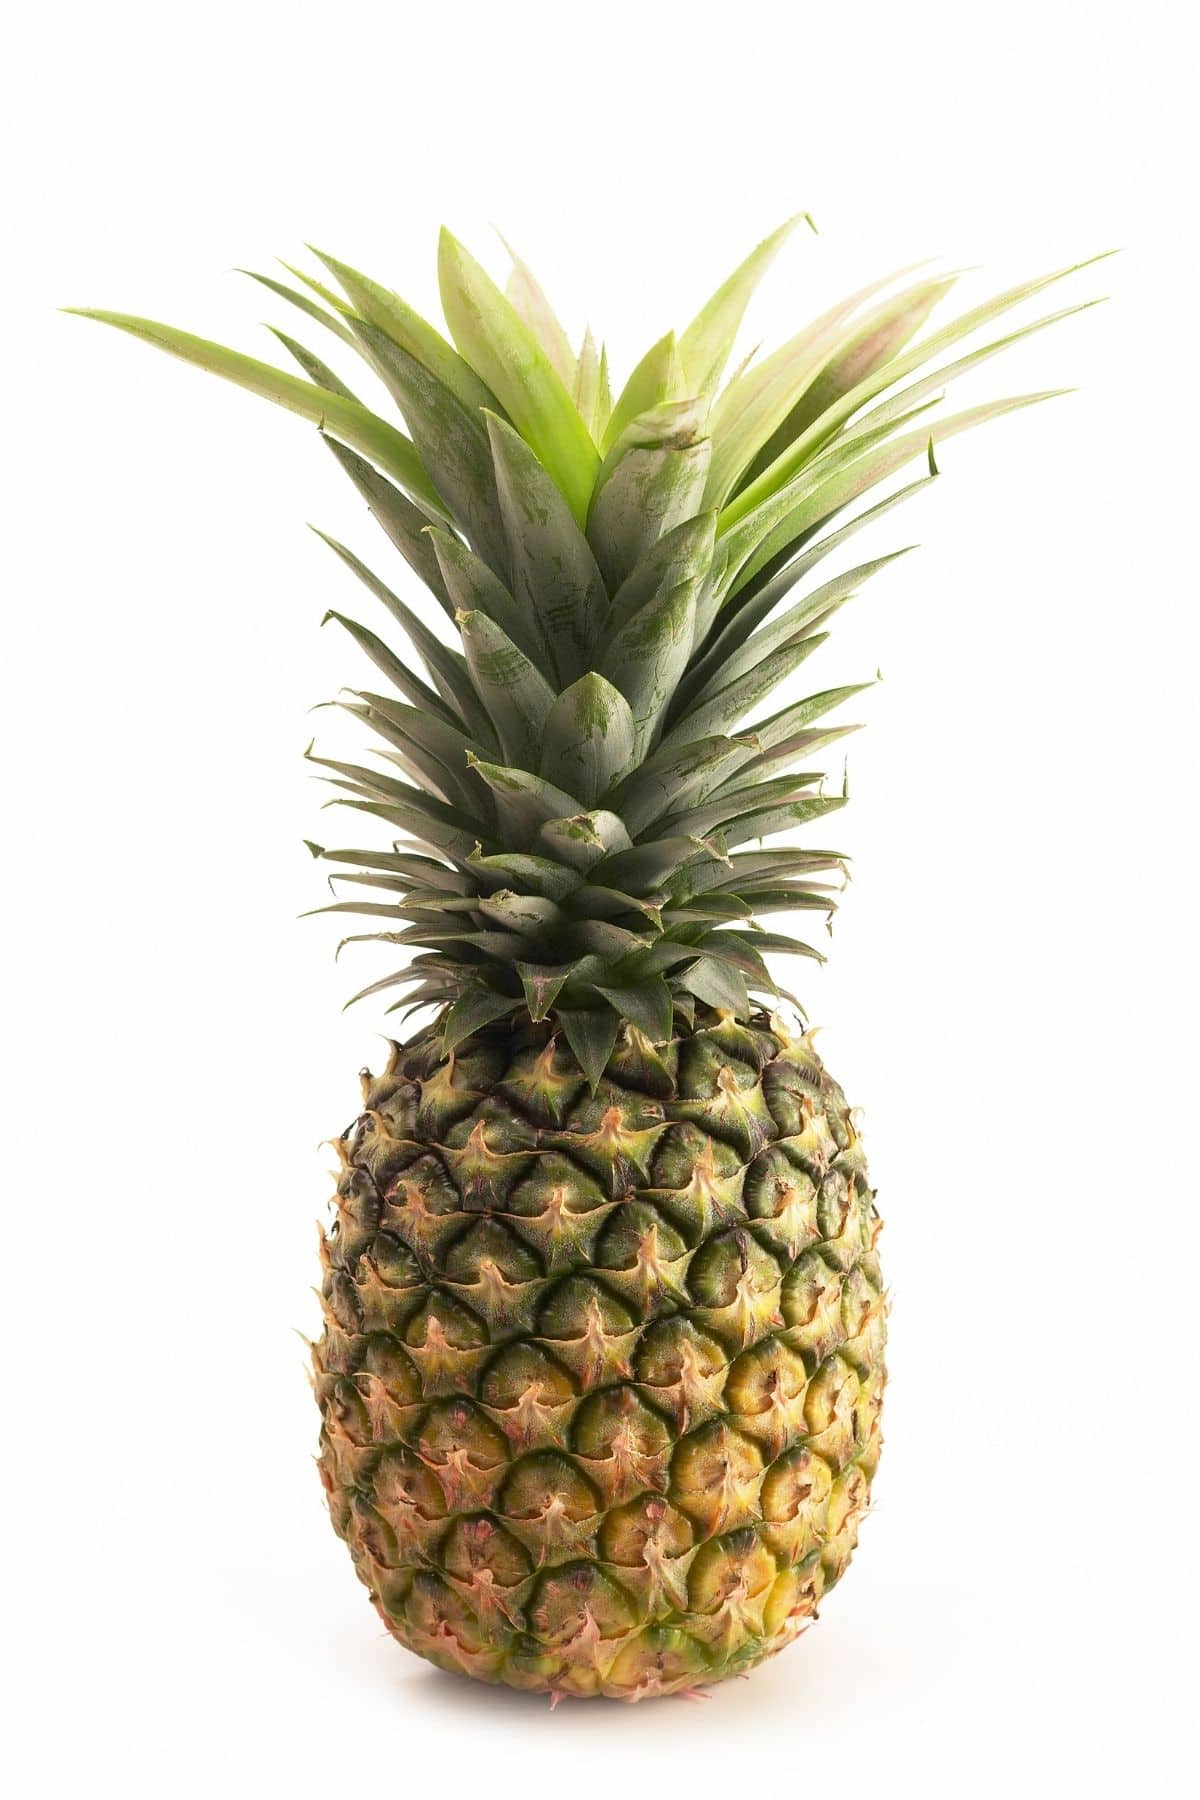 A fresh whole pineapple on a white background.